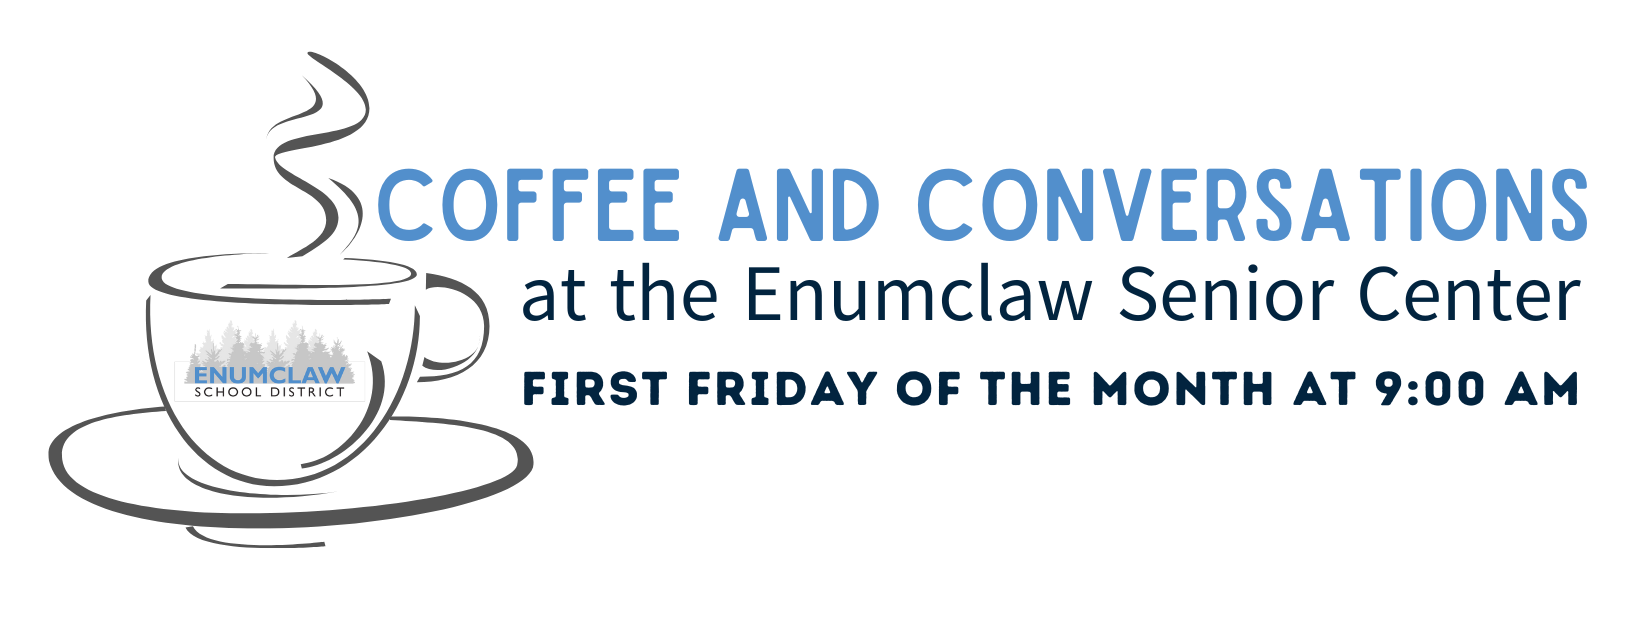 Coffee and Conversations at the Enumclaw Senior Center First Friday of the month at 9:00 AM